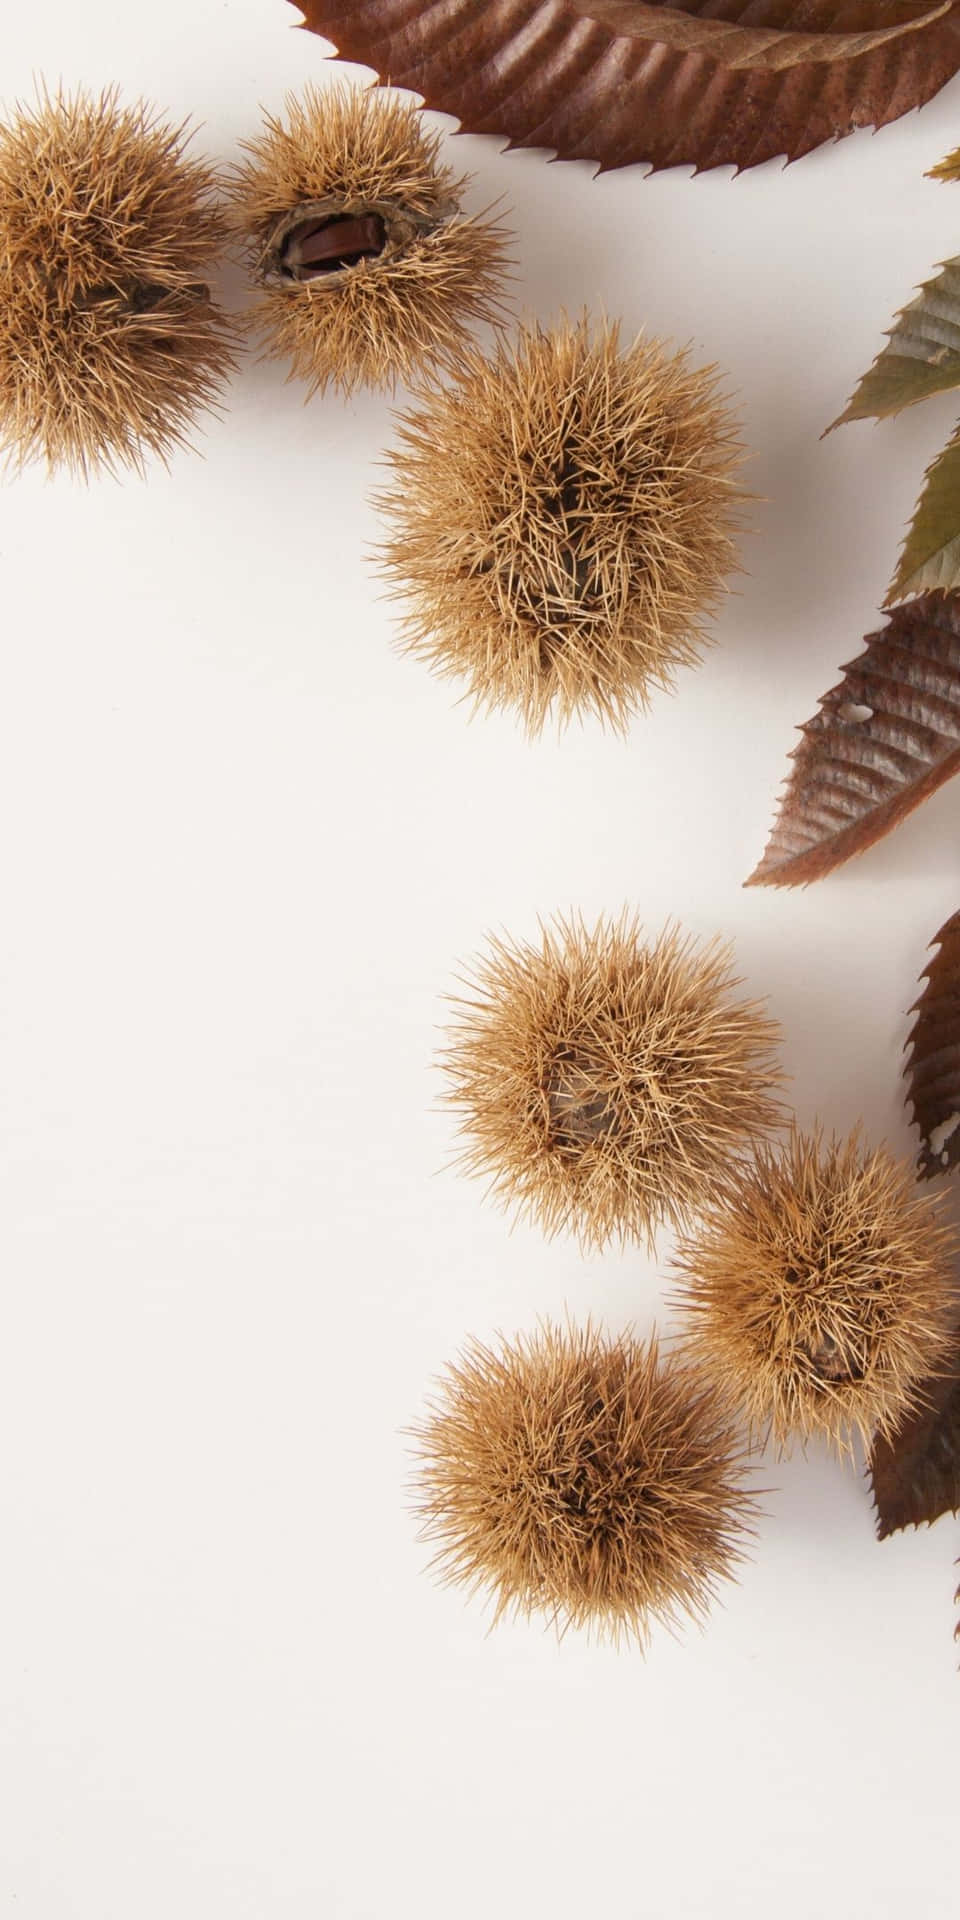 Aesthetic Android Autumn Background Of Spiky Chestnuts Background